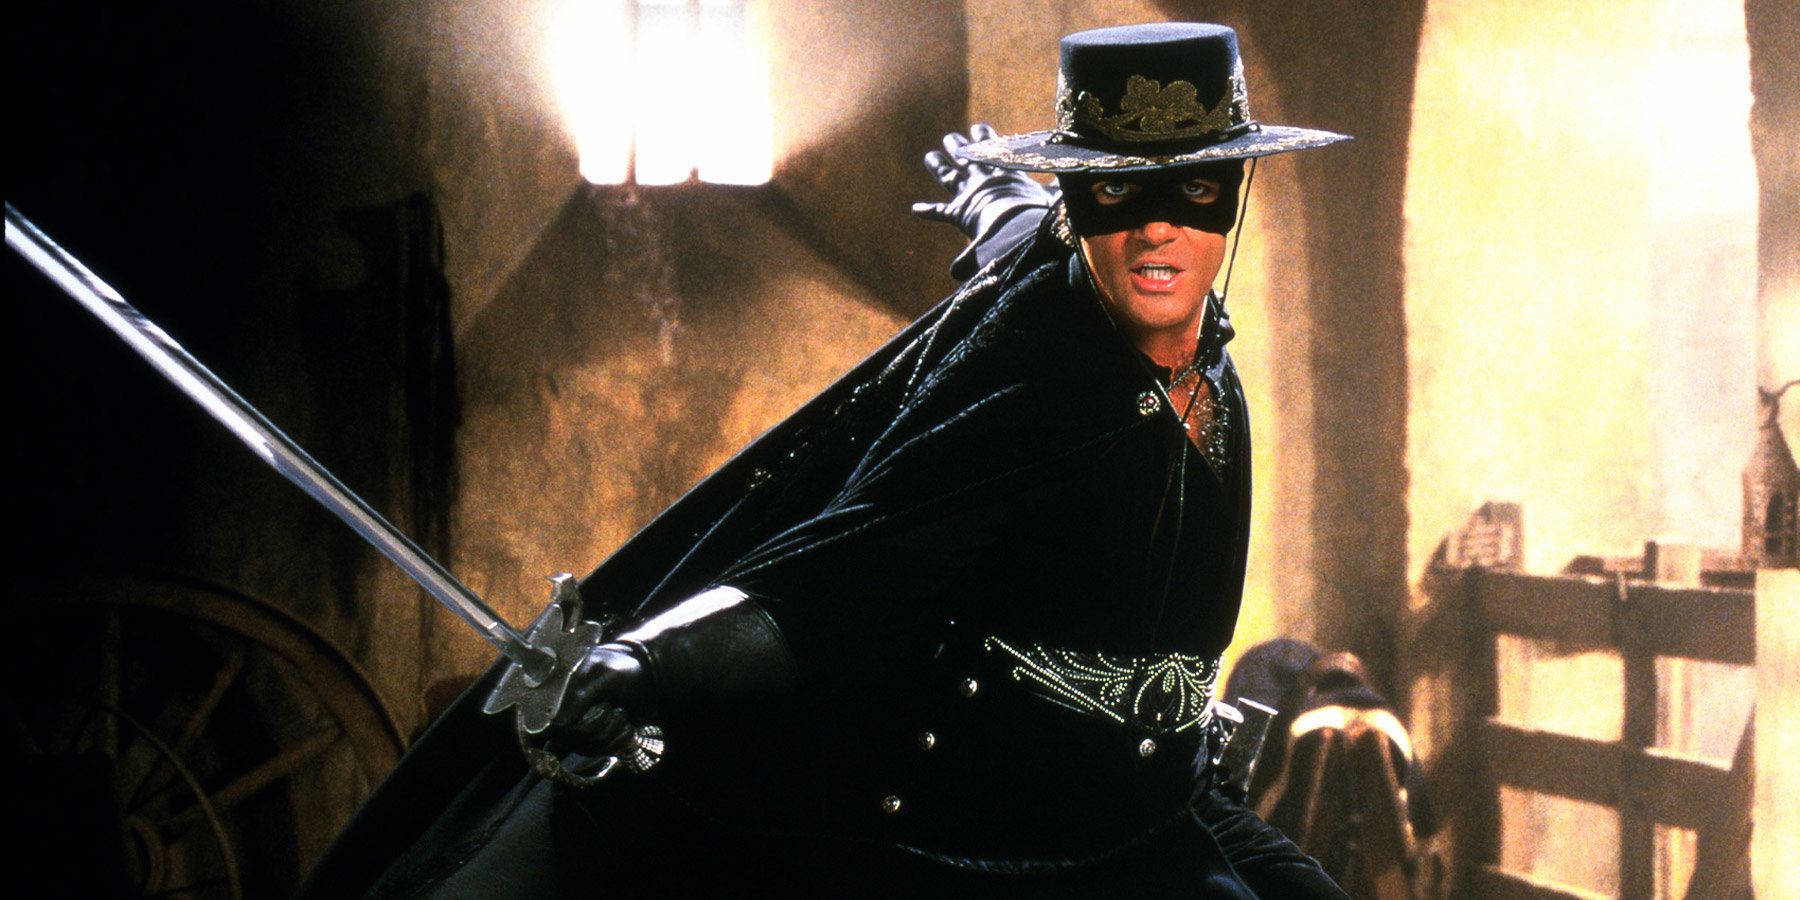 Antonio Banderas in a fighting stance in the Mask of Zorro